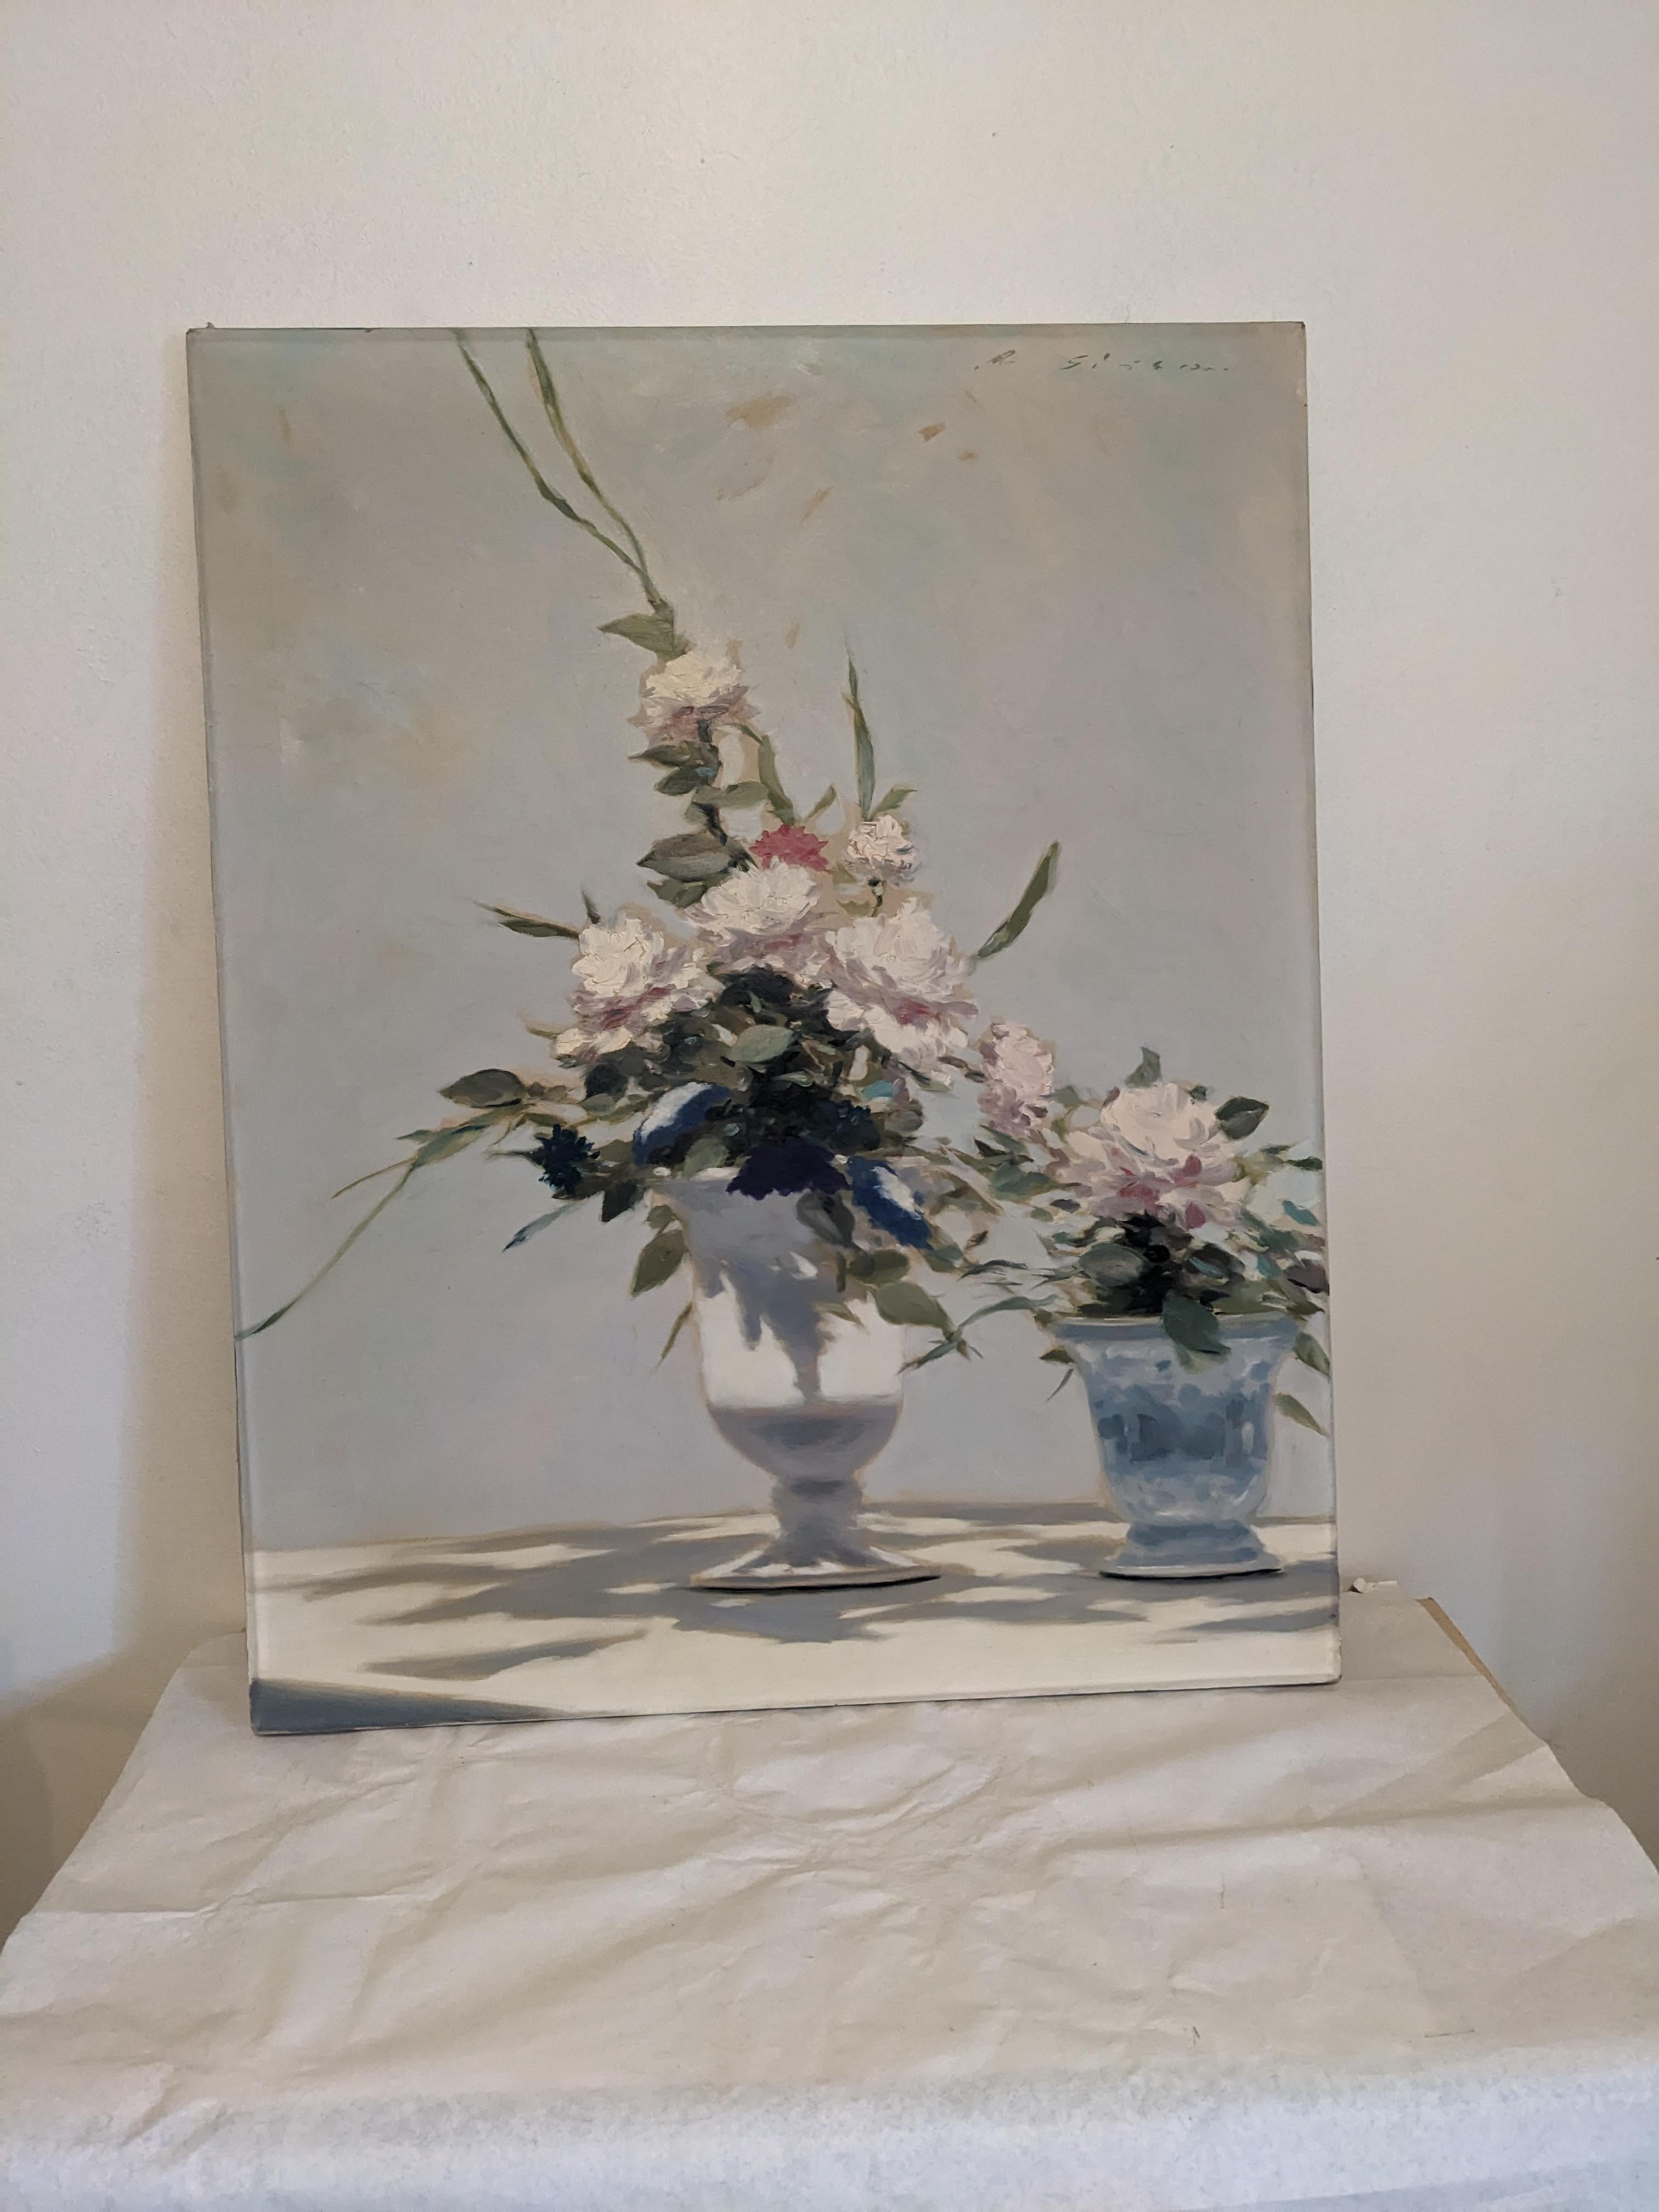 Art Deco Impressionist Floral Still Life in muted, moody tones by a talented artist. Signed but illegible, 1930's USA. 